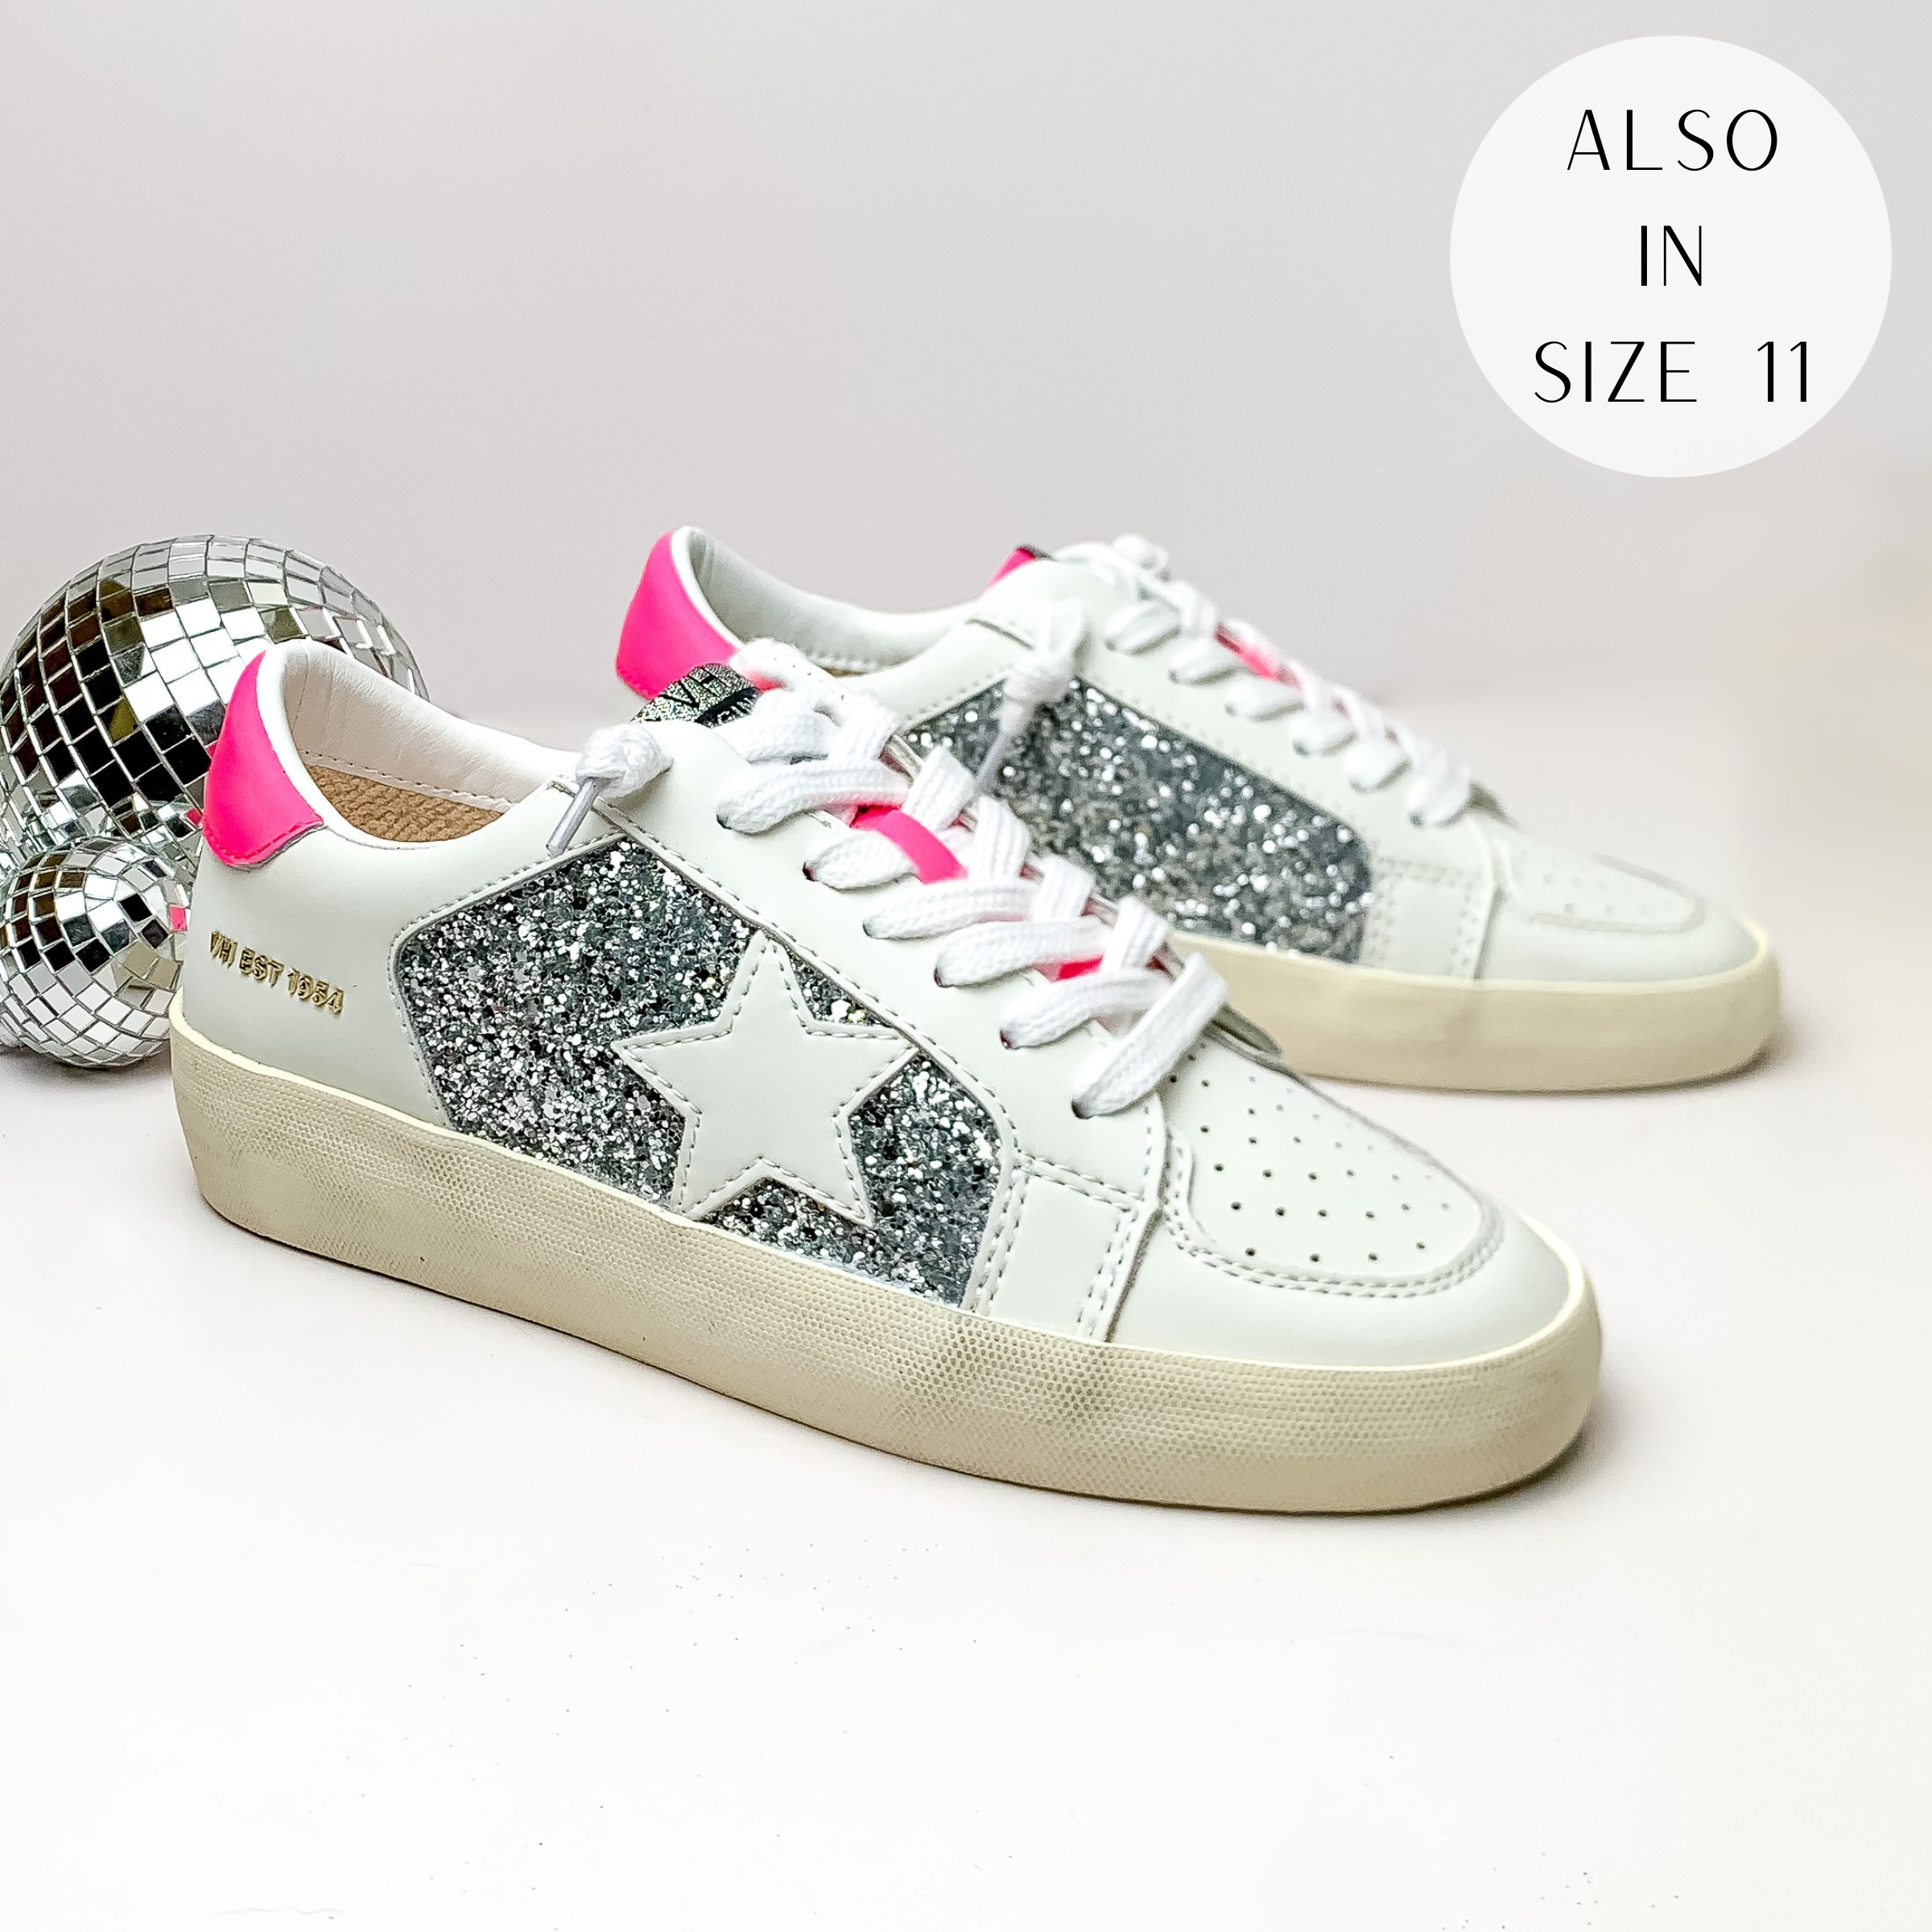 Vintage Havana | Positivity Sneakers in Pink Pop - Giddy Up Glamour Boutique